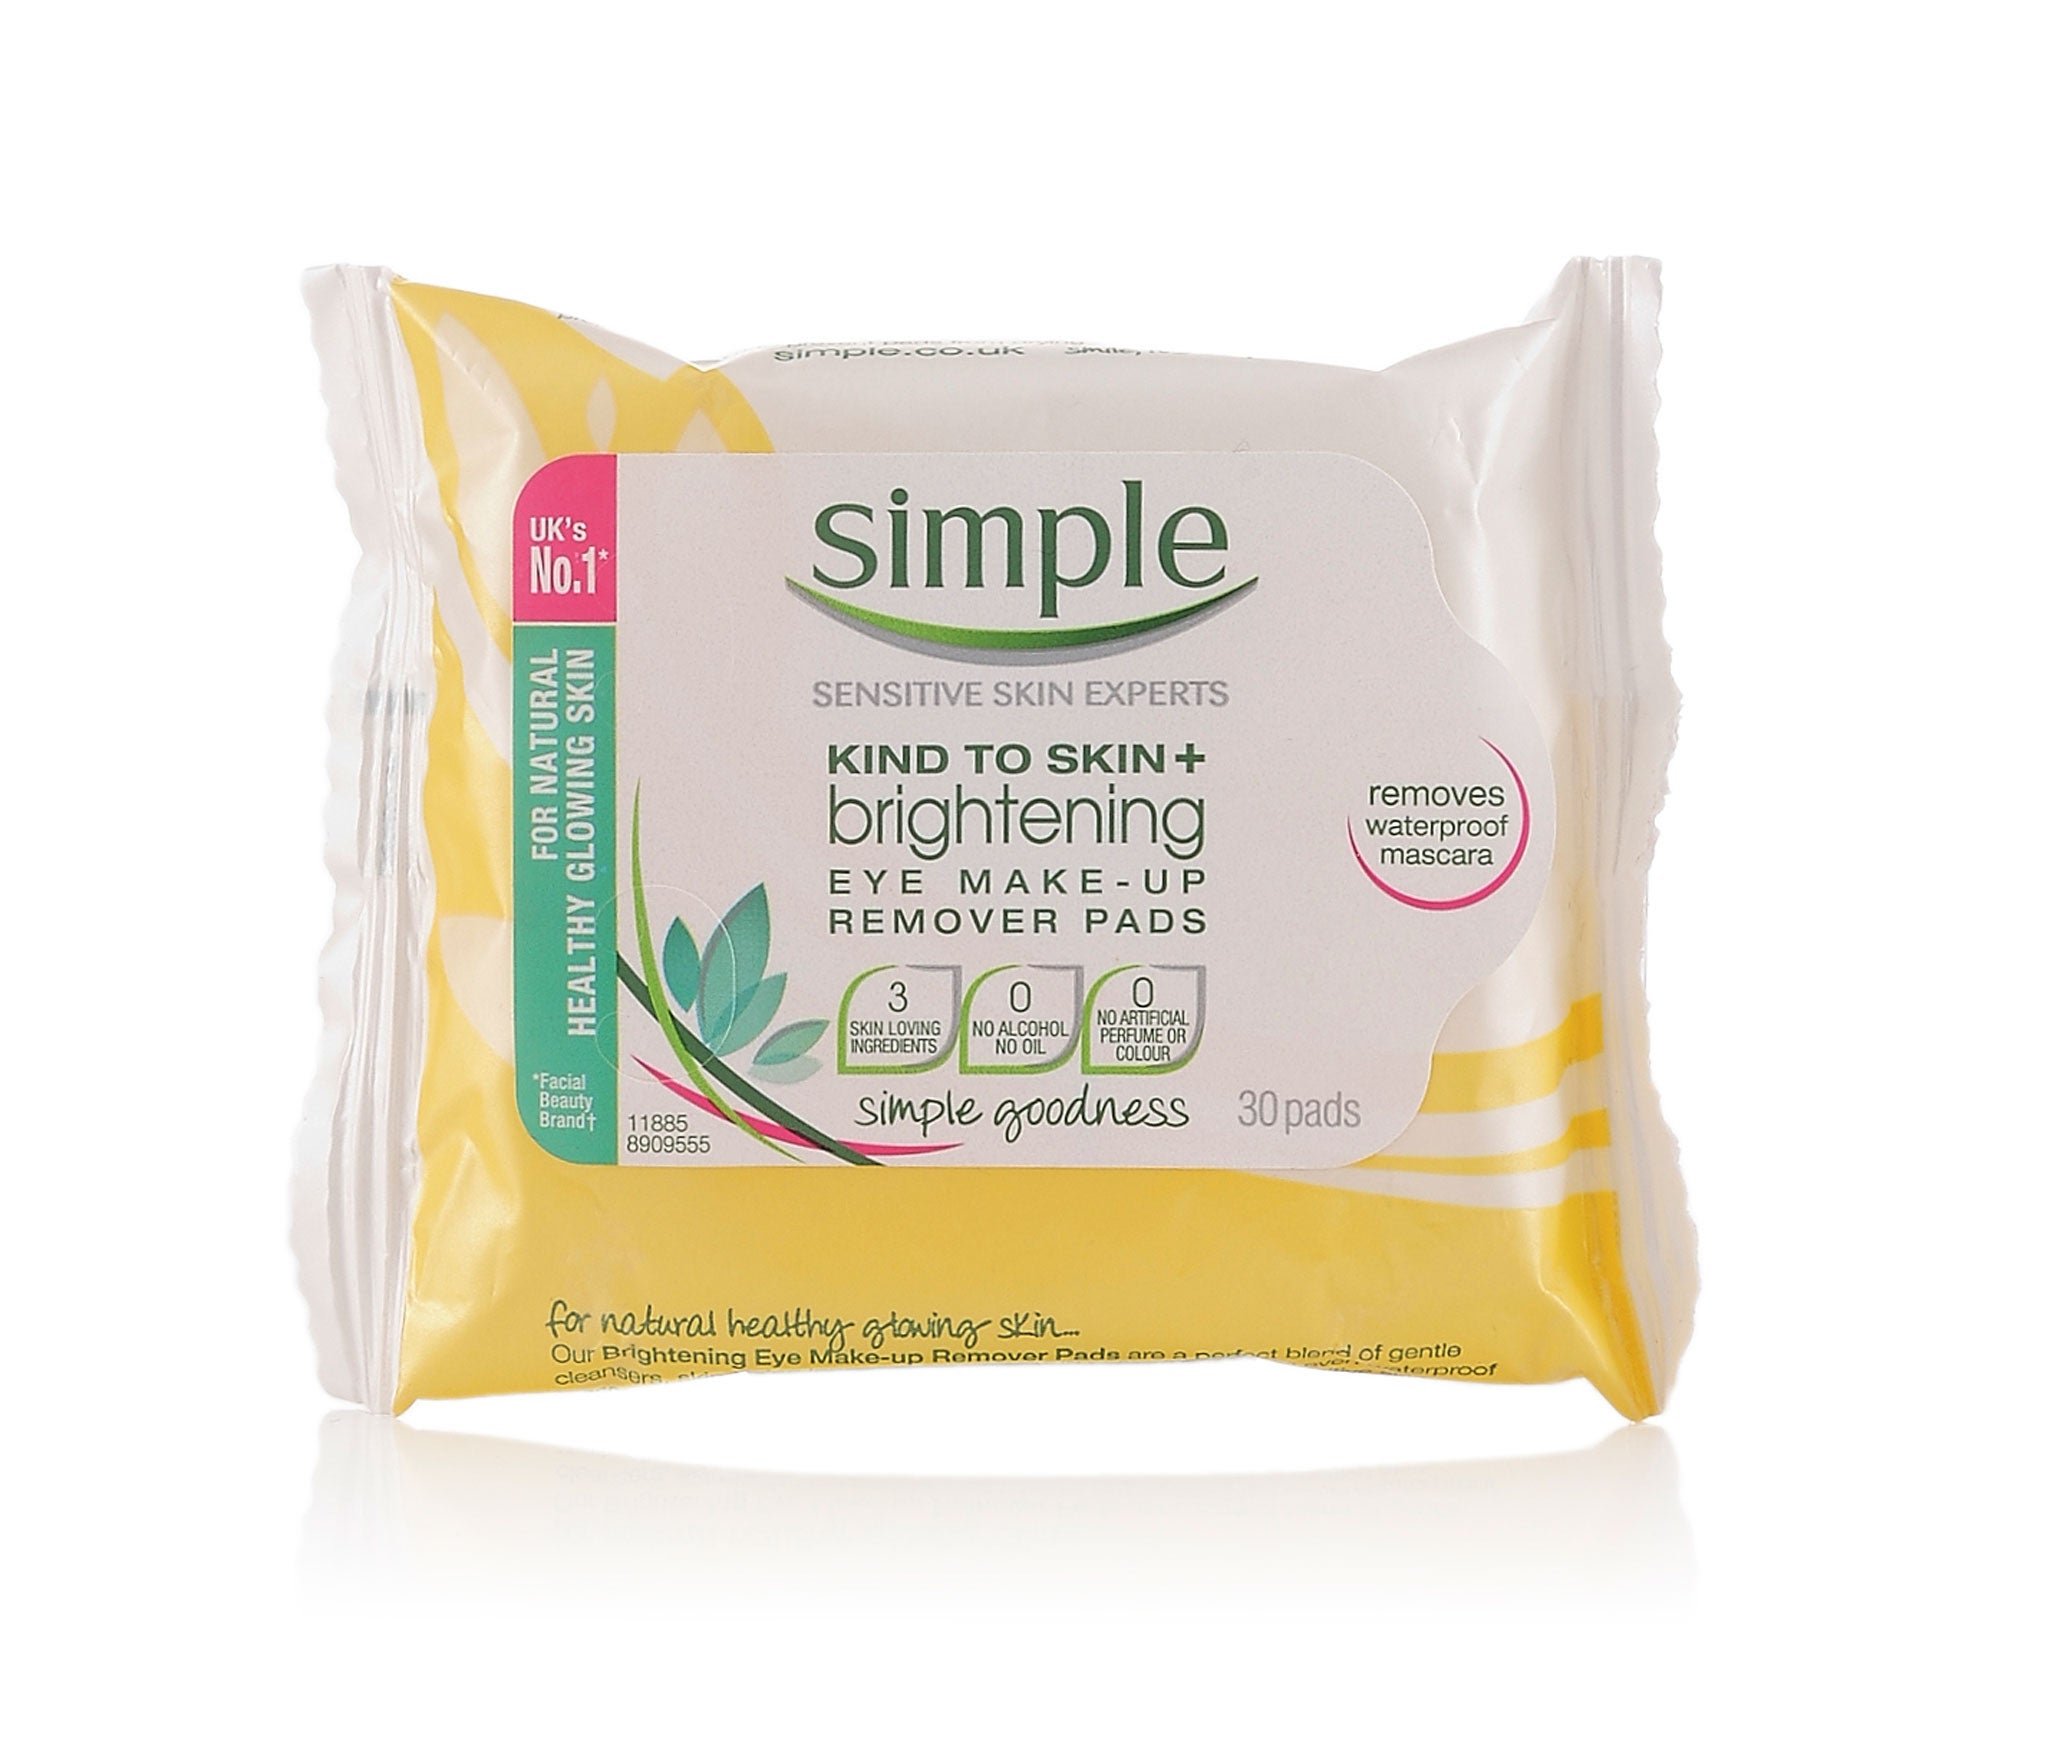 Radiance brightening eye make-up remover pads, £3.99, Simple